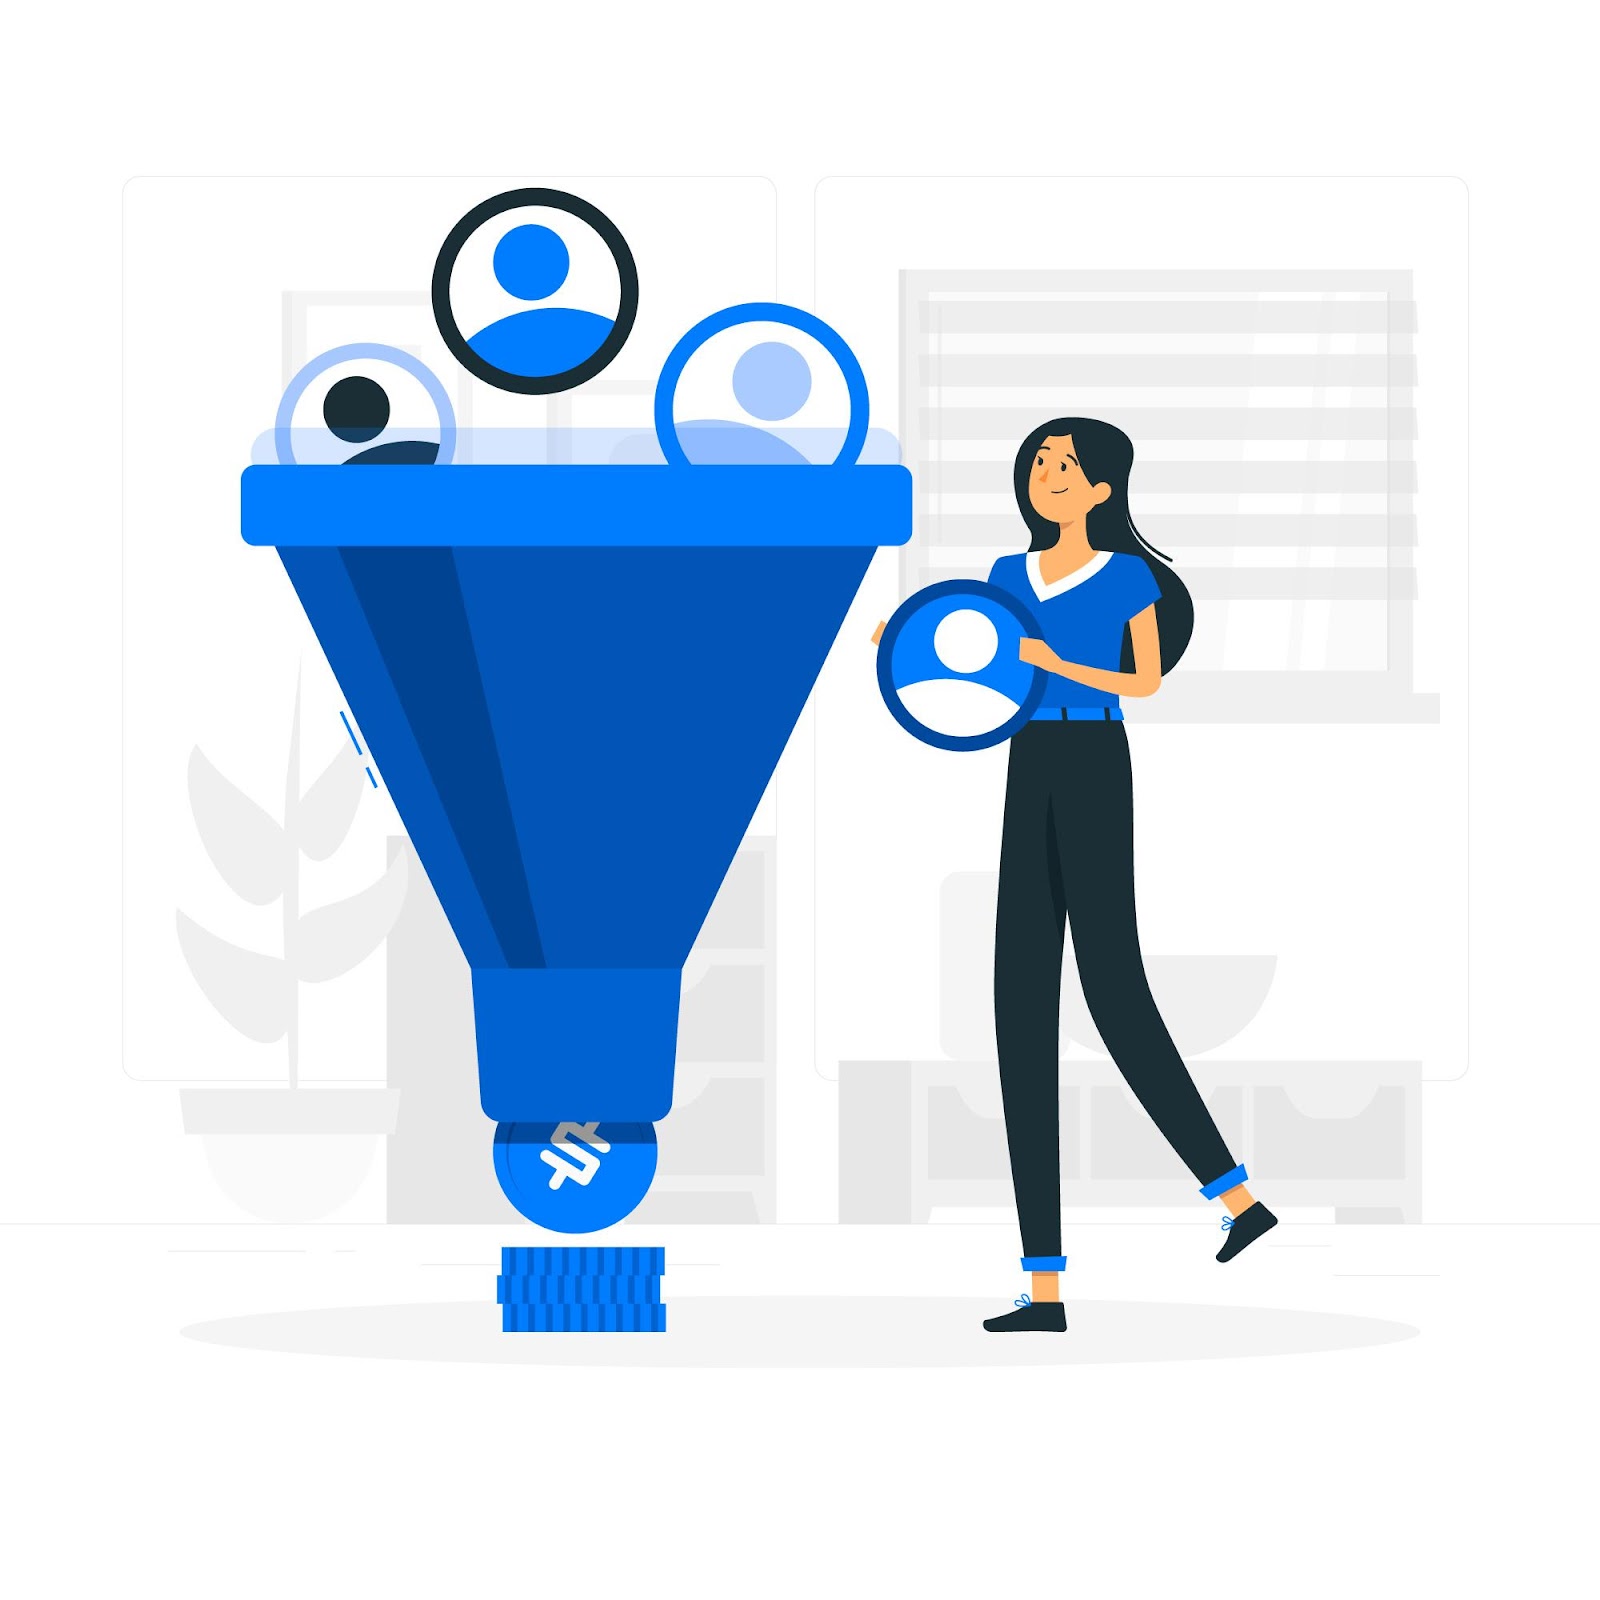 Optimize the Sales funnel